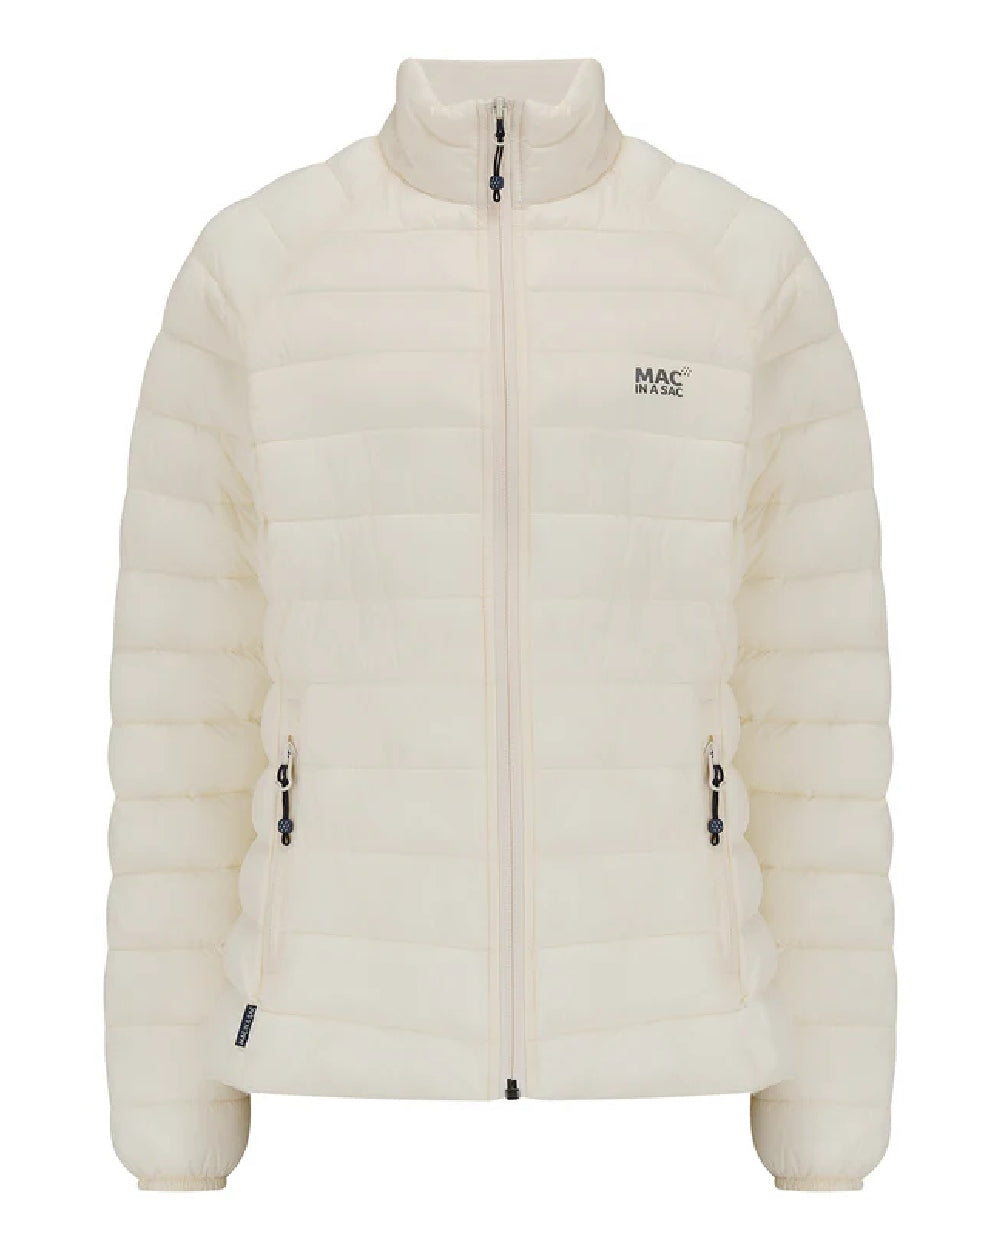 Ivory coloured Mac In A Sac Womens Synergy Jacket on white background 